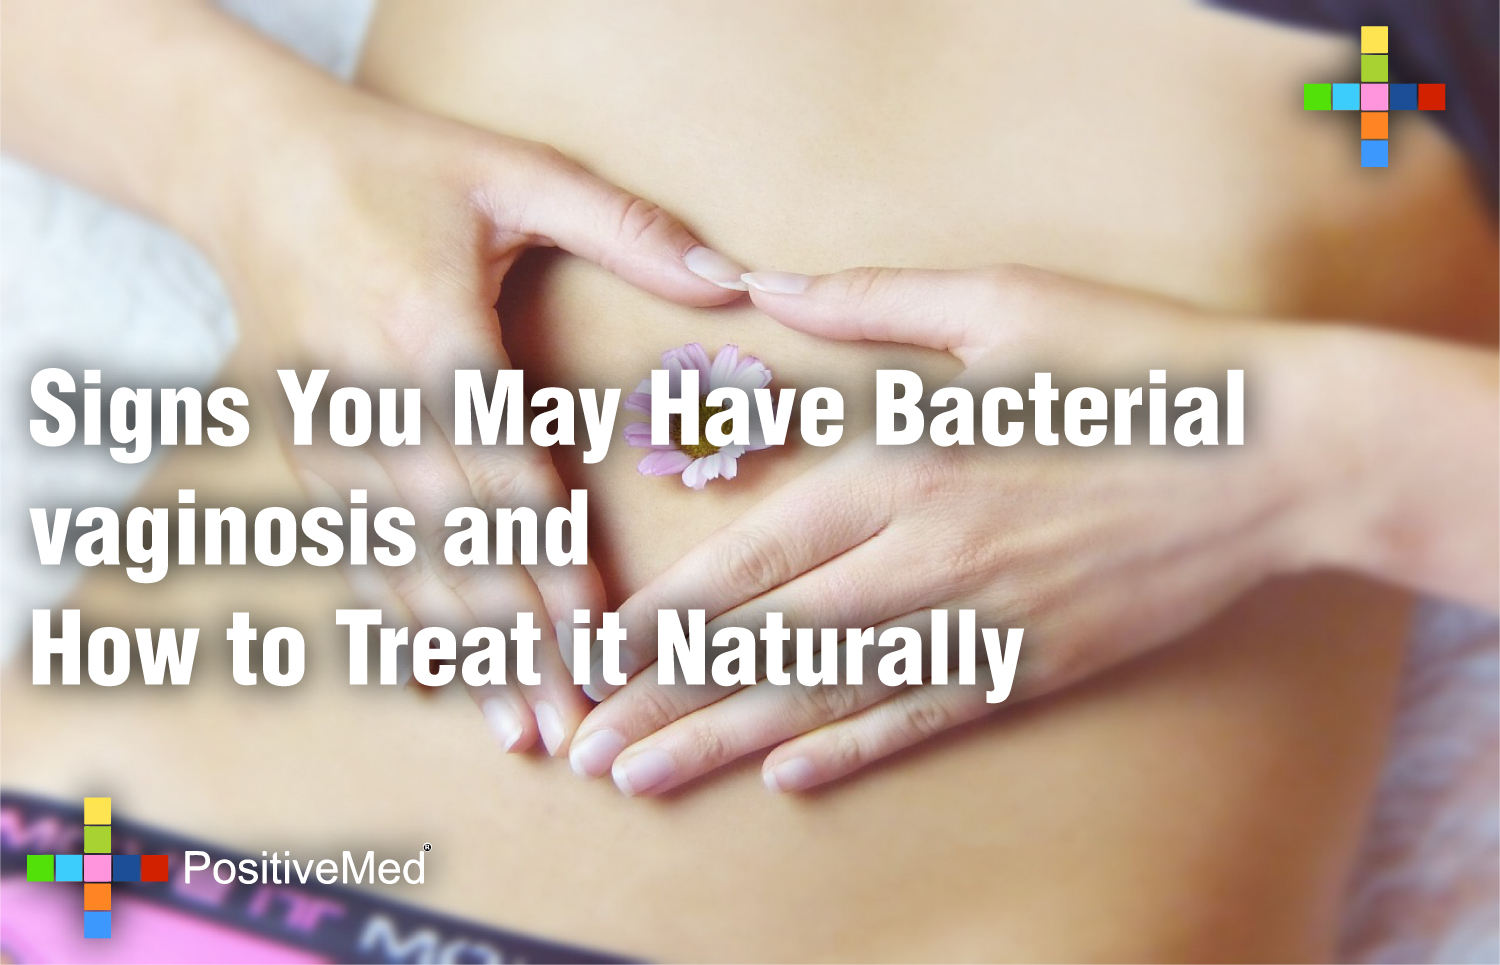 Signs You May Have Bacterial vaginosis and How to Treat it